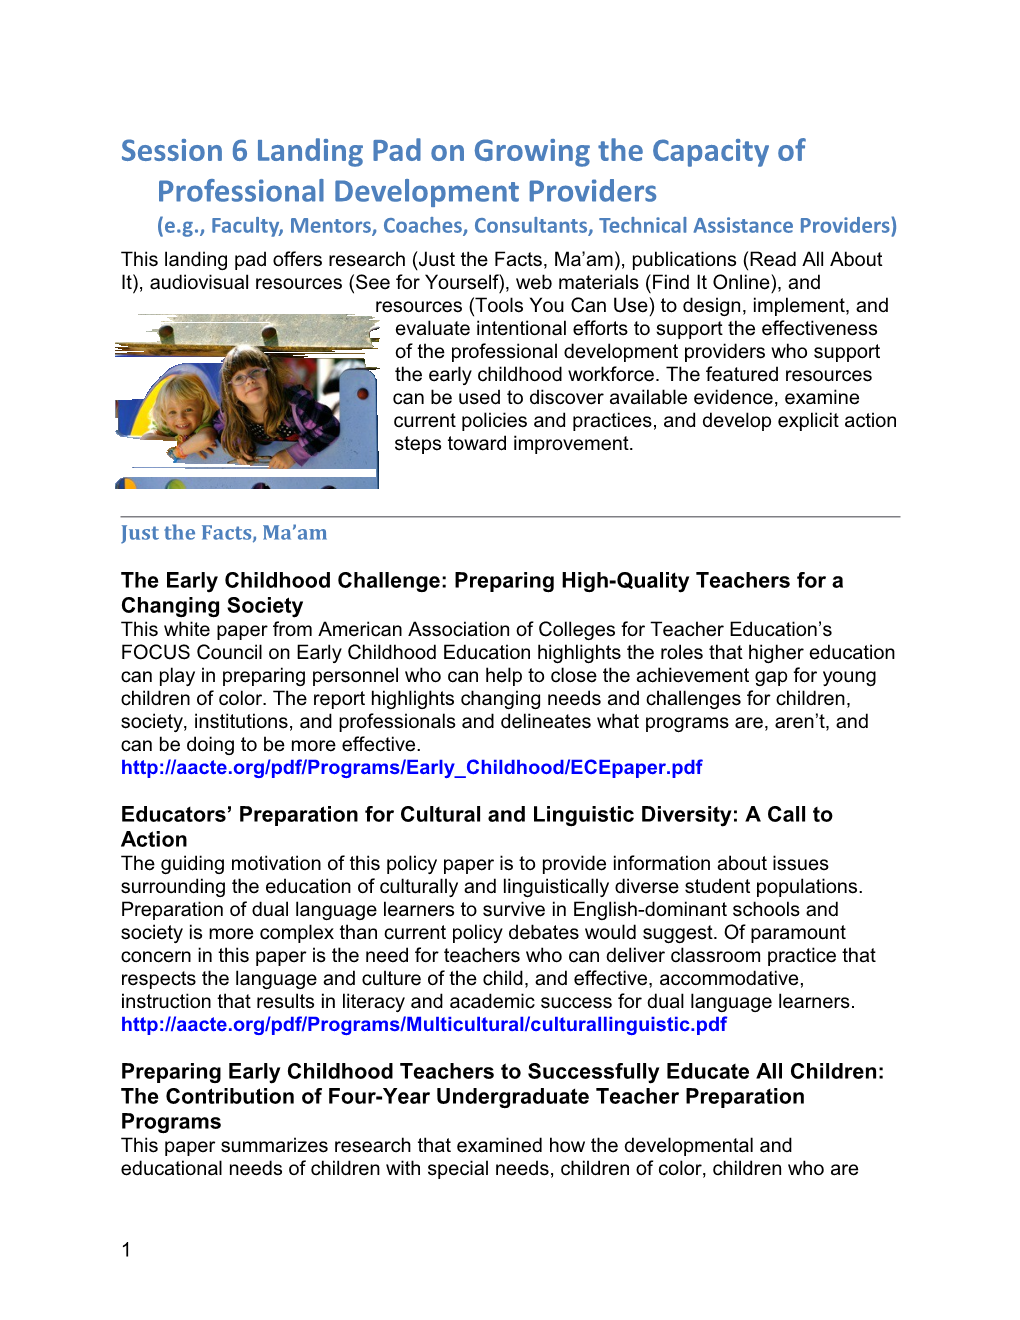 The Early Childhood Challenge: Preparing High-Quality Teachers for a Changing Society